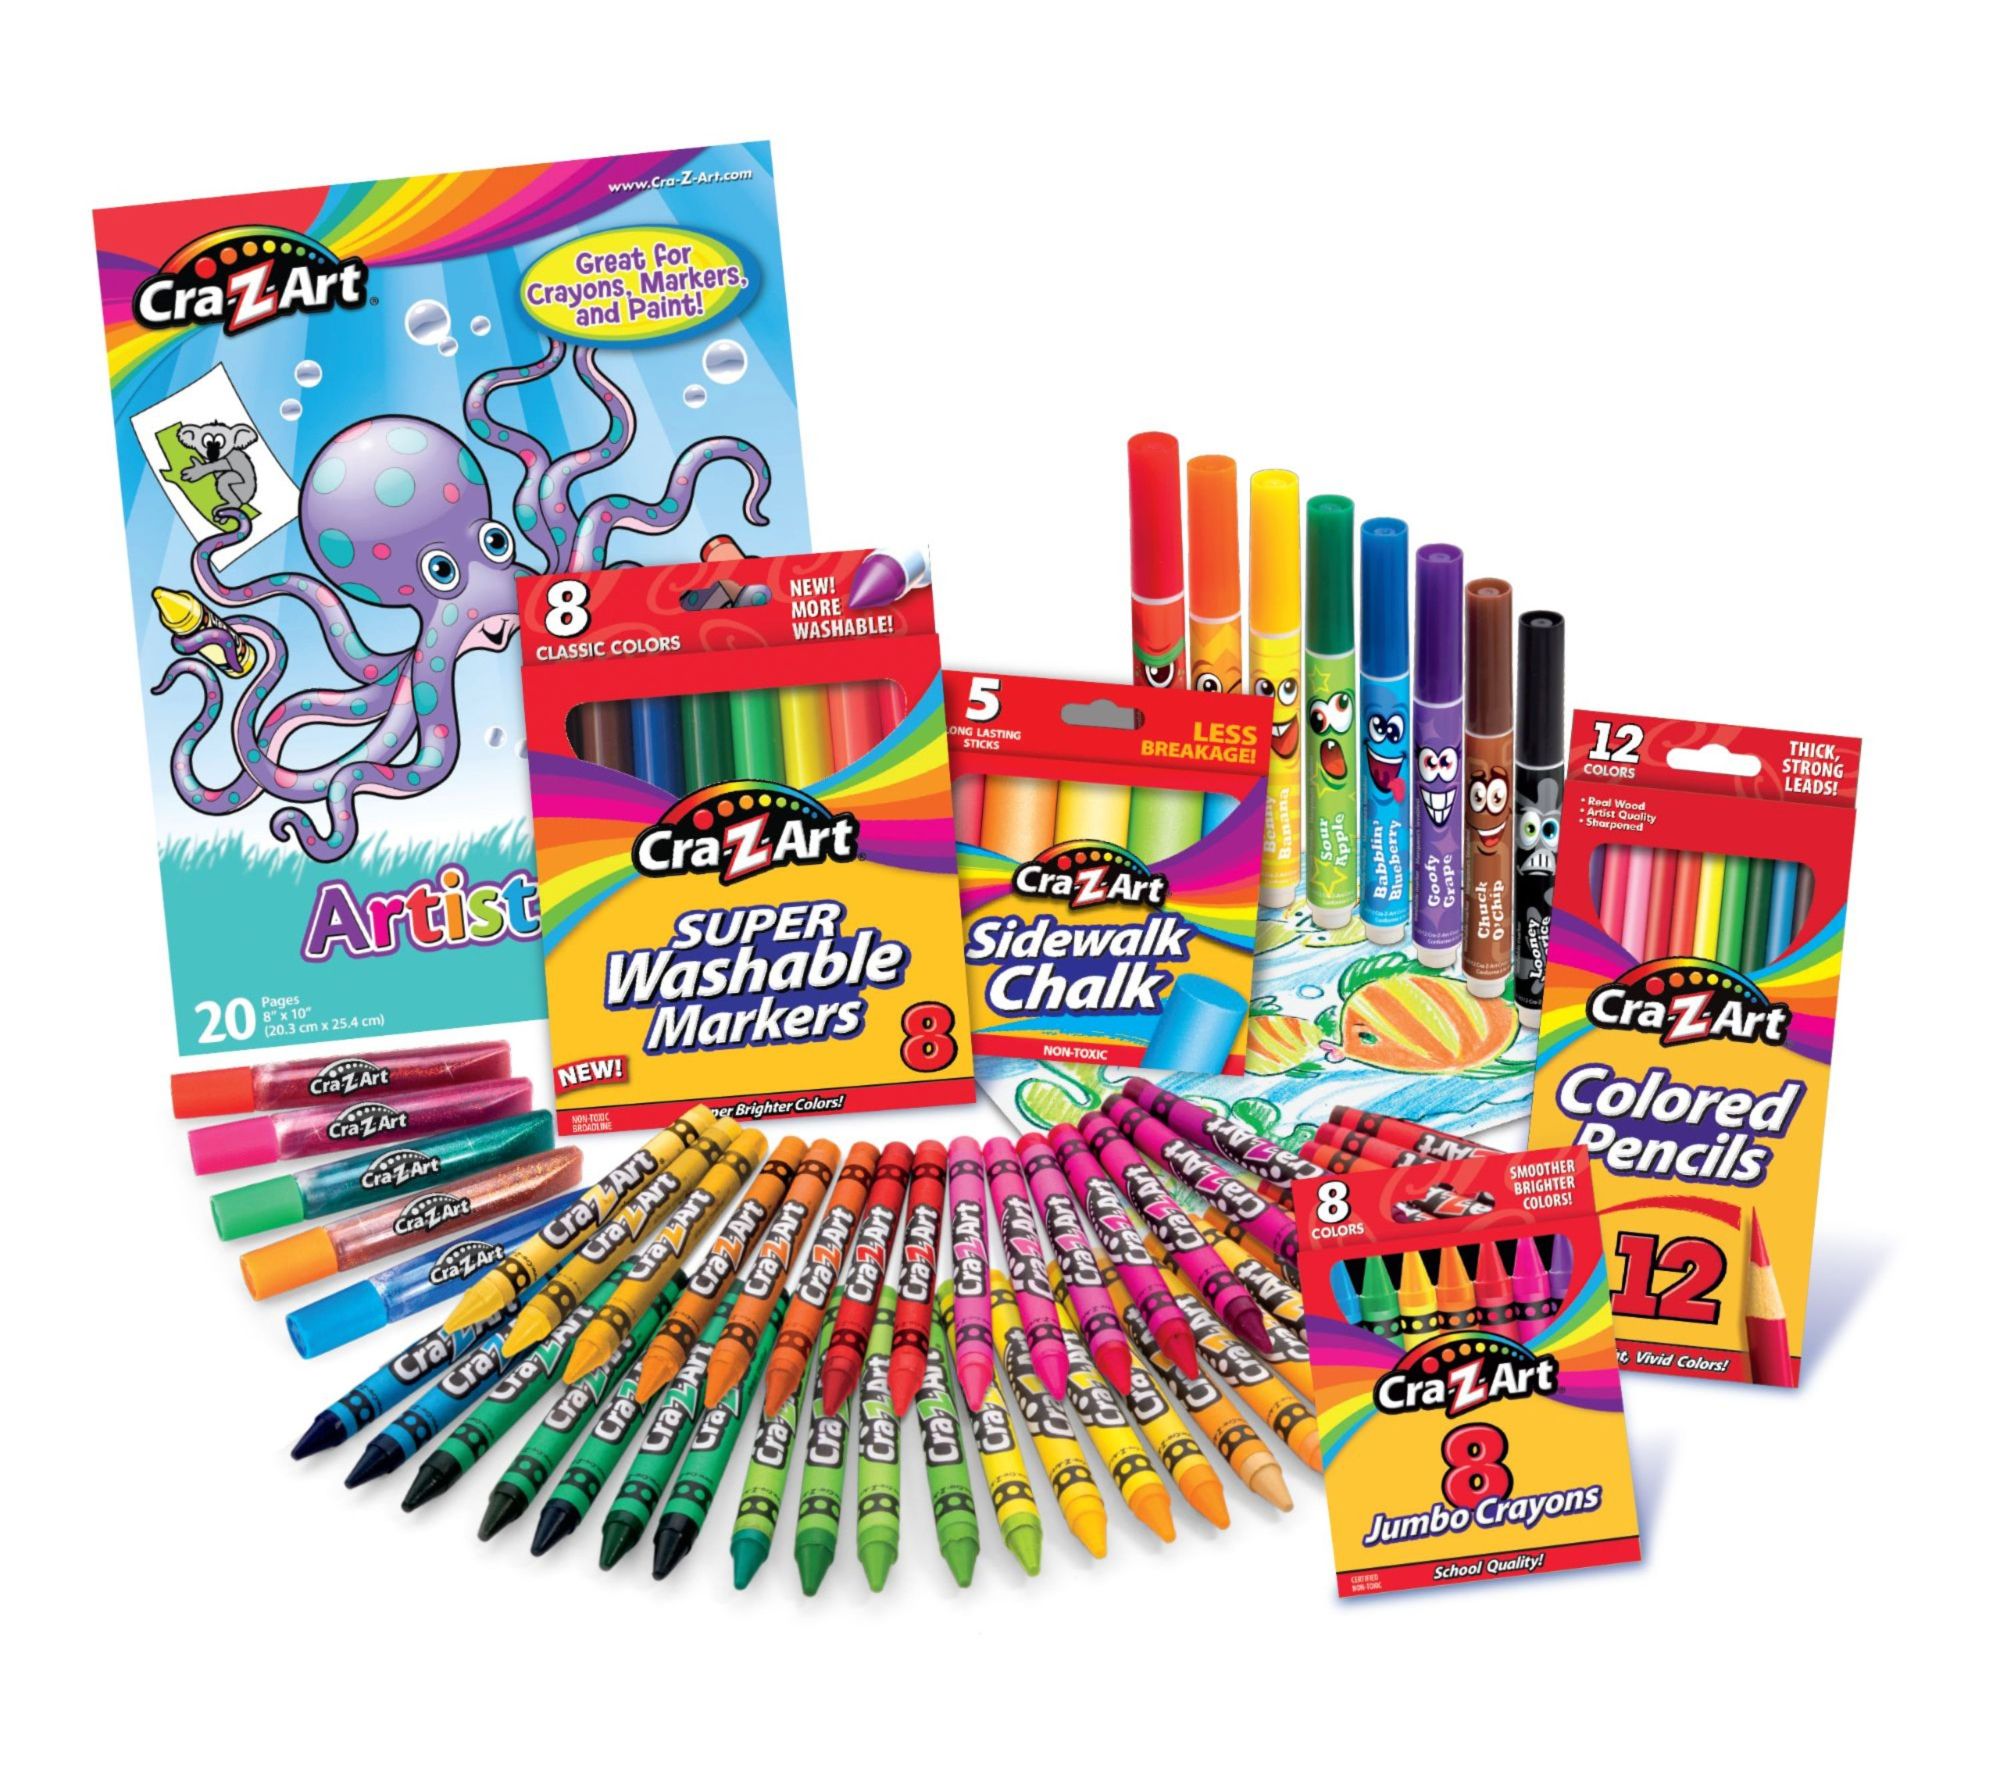 Cra-Z-Art Neon Colored Pencils 12 Count, Beginner Child Ages 4 and Up